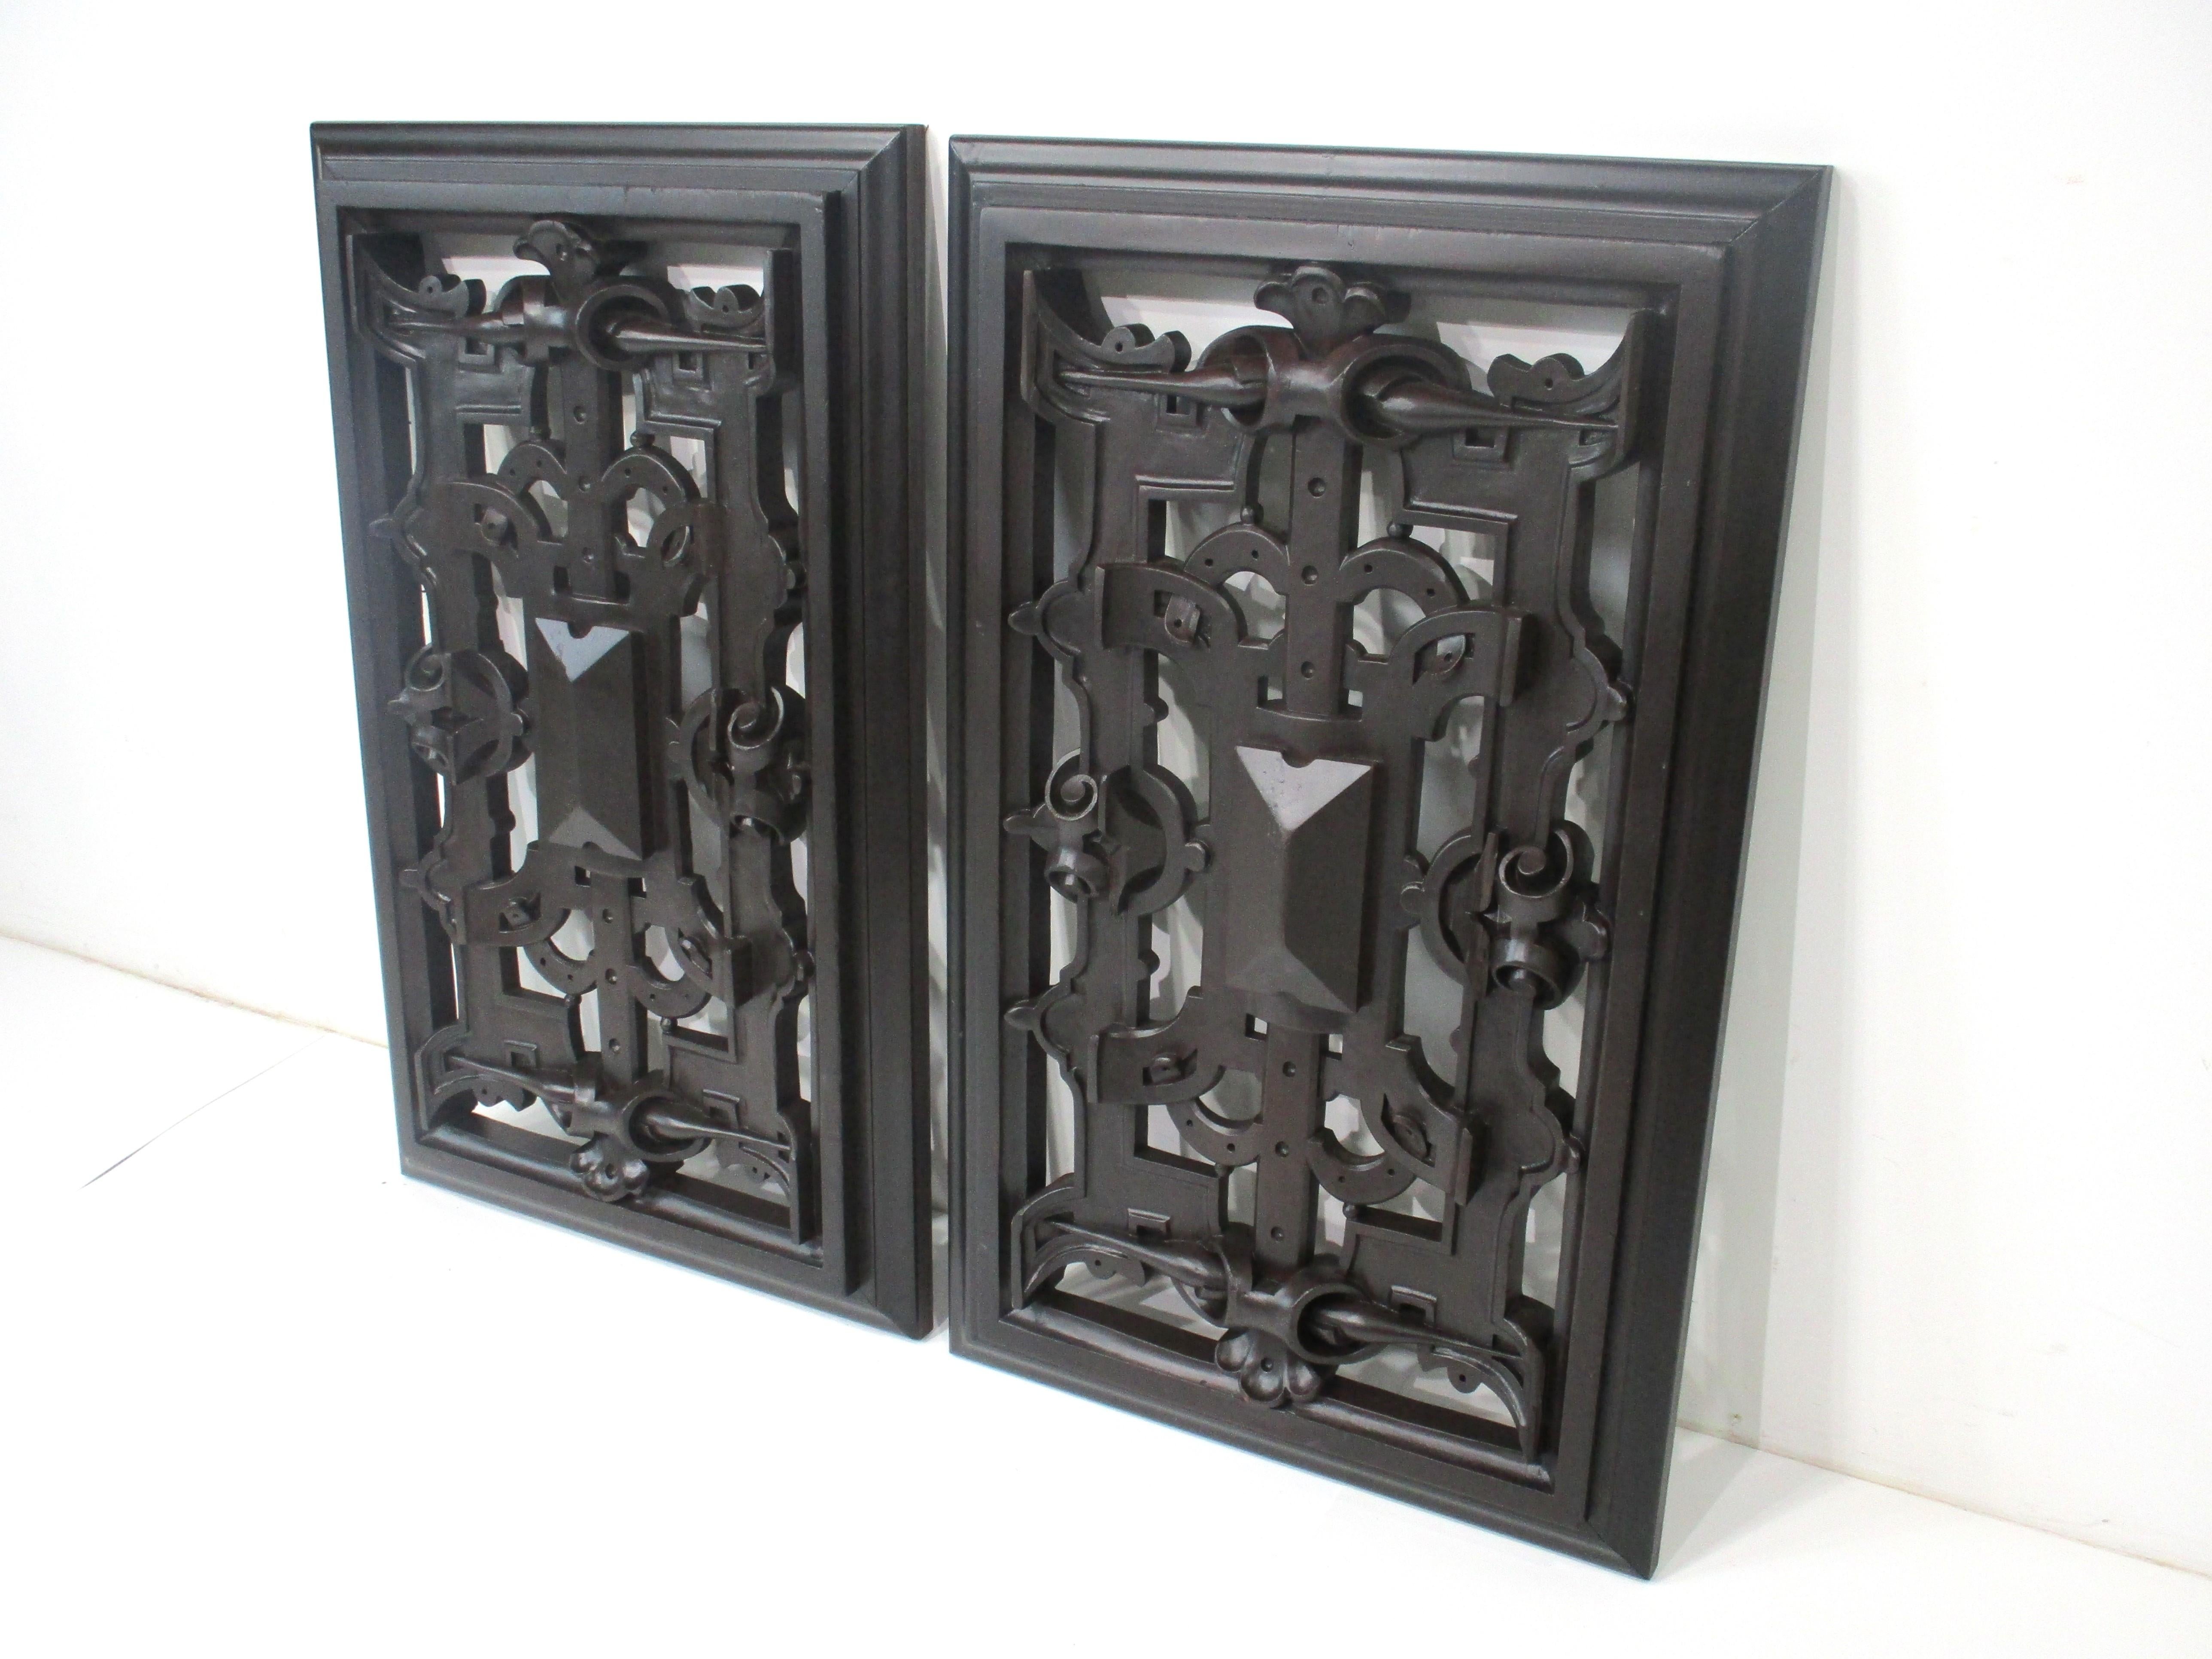 A pair of hand carved wood panels with intertwining designs covering the whole front and back with a framed look to each . Two well crafted pieces that could be used hanging in front of small windows since there is space between the carvings for